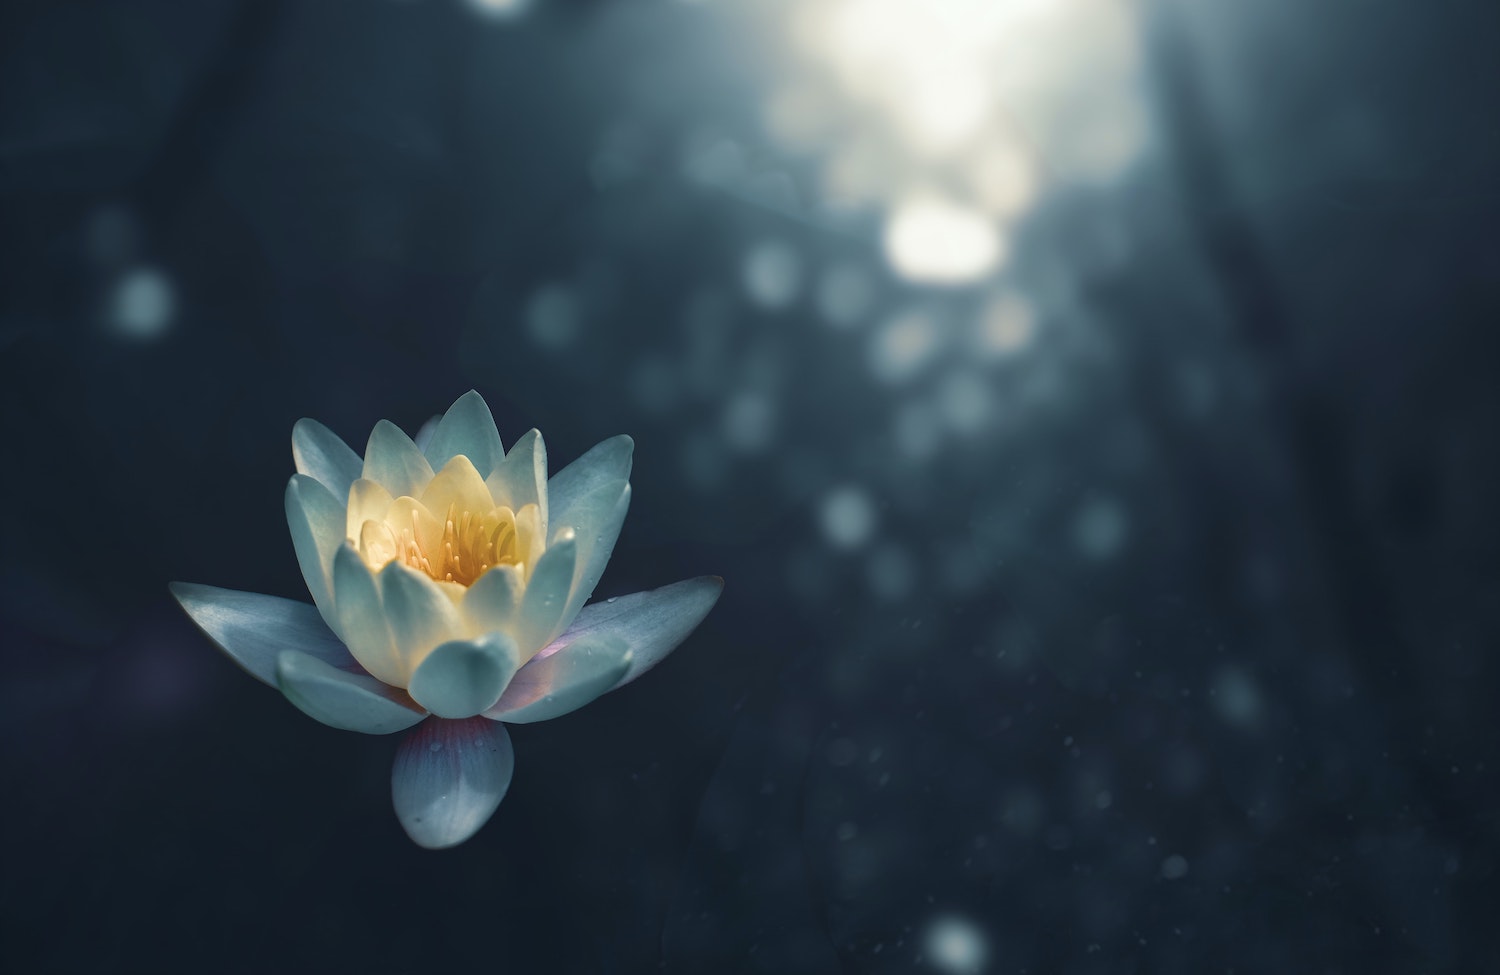 A lotus flower on water